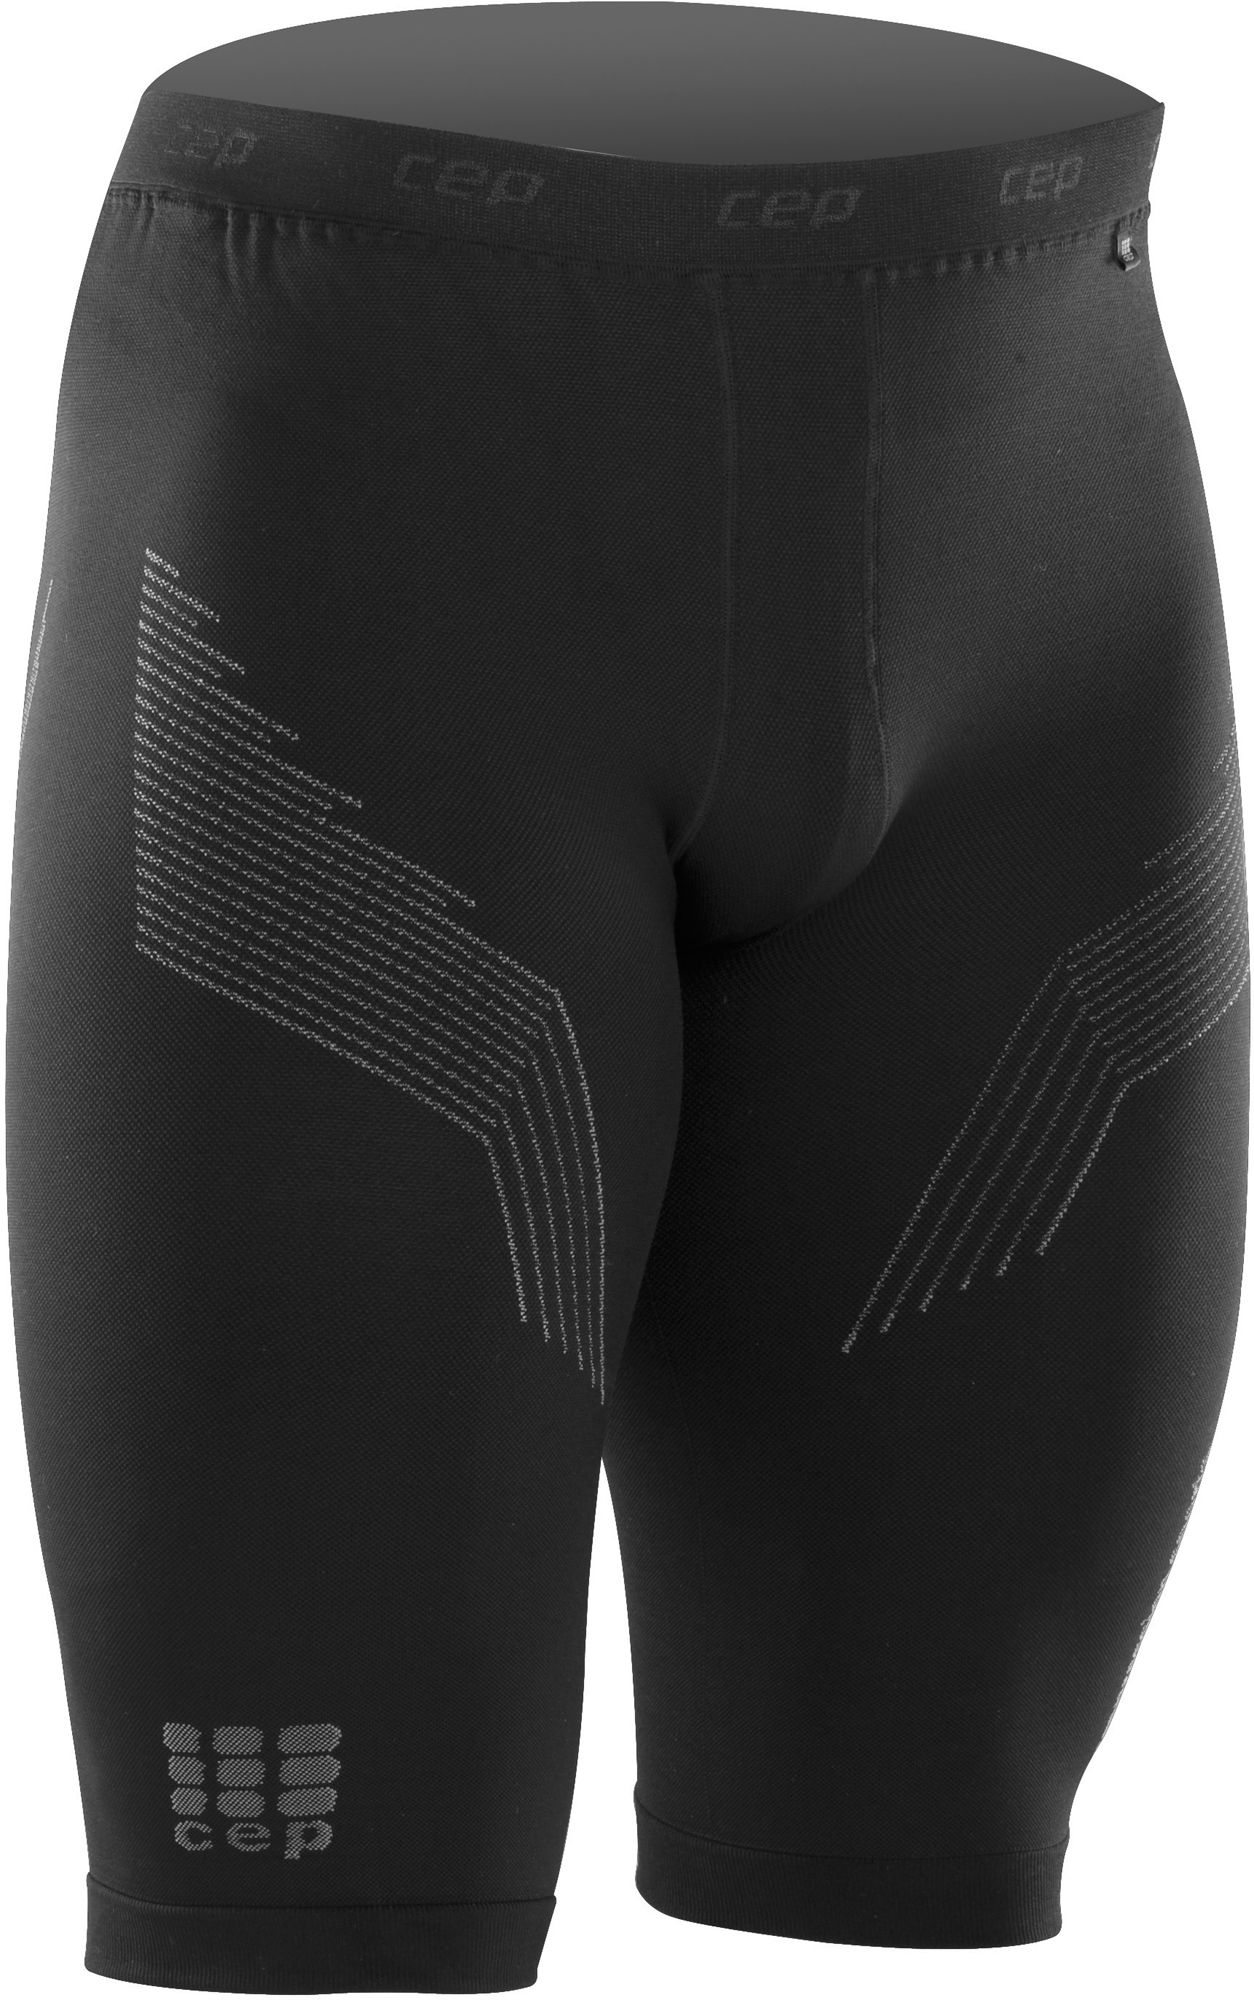 Men's Compression Shorts | DICK'S Sporting Goods